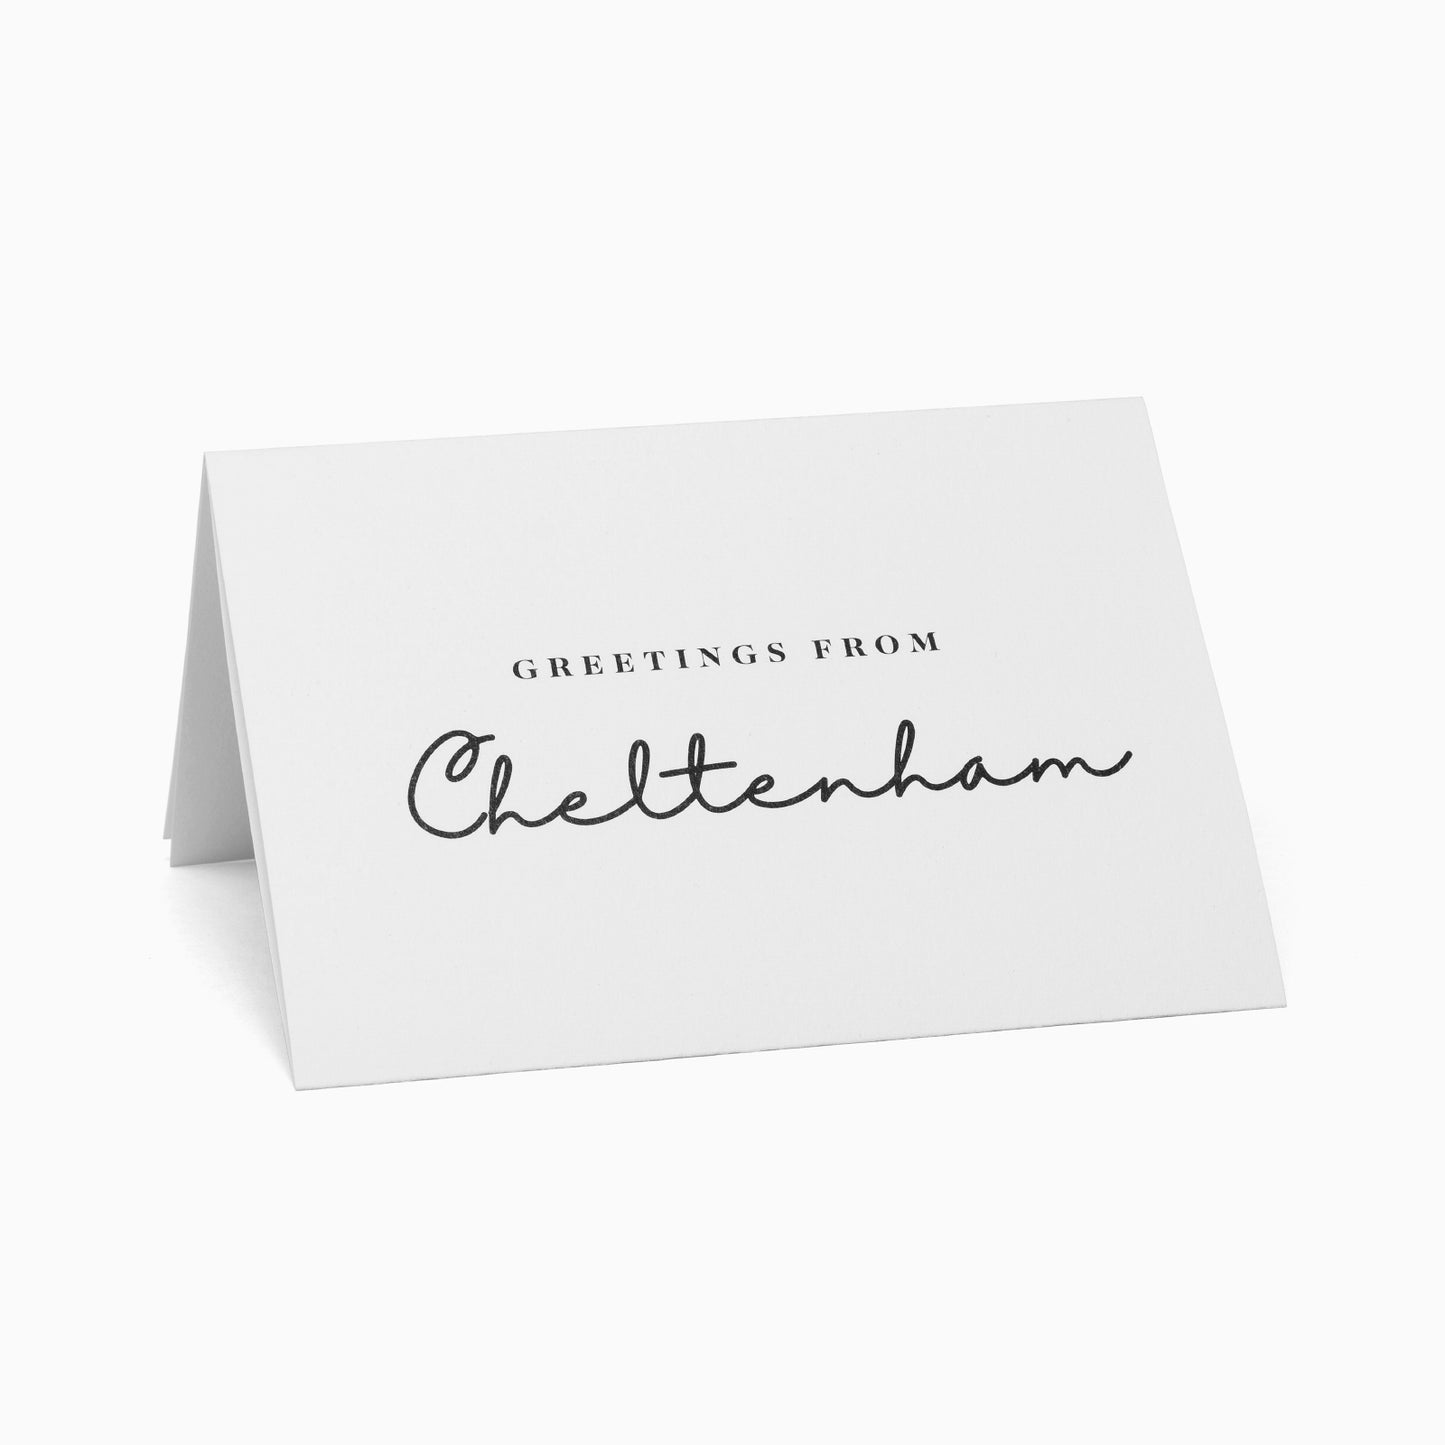 Greetings from Cheltenham Pittville Pump Room Pop-Up Card by PaperLandmarks